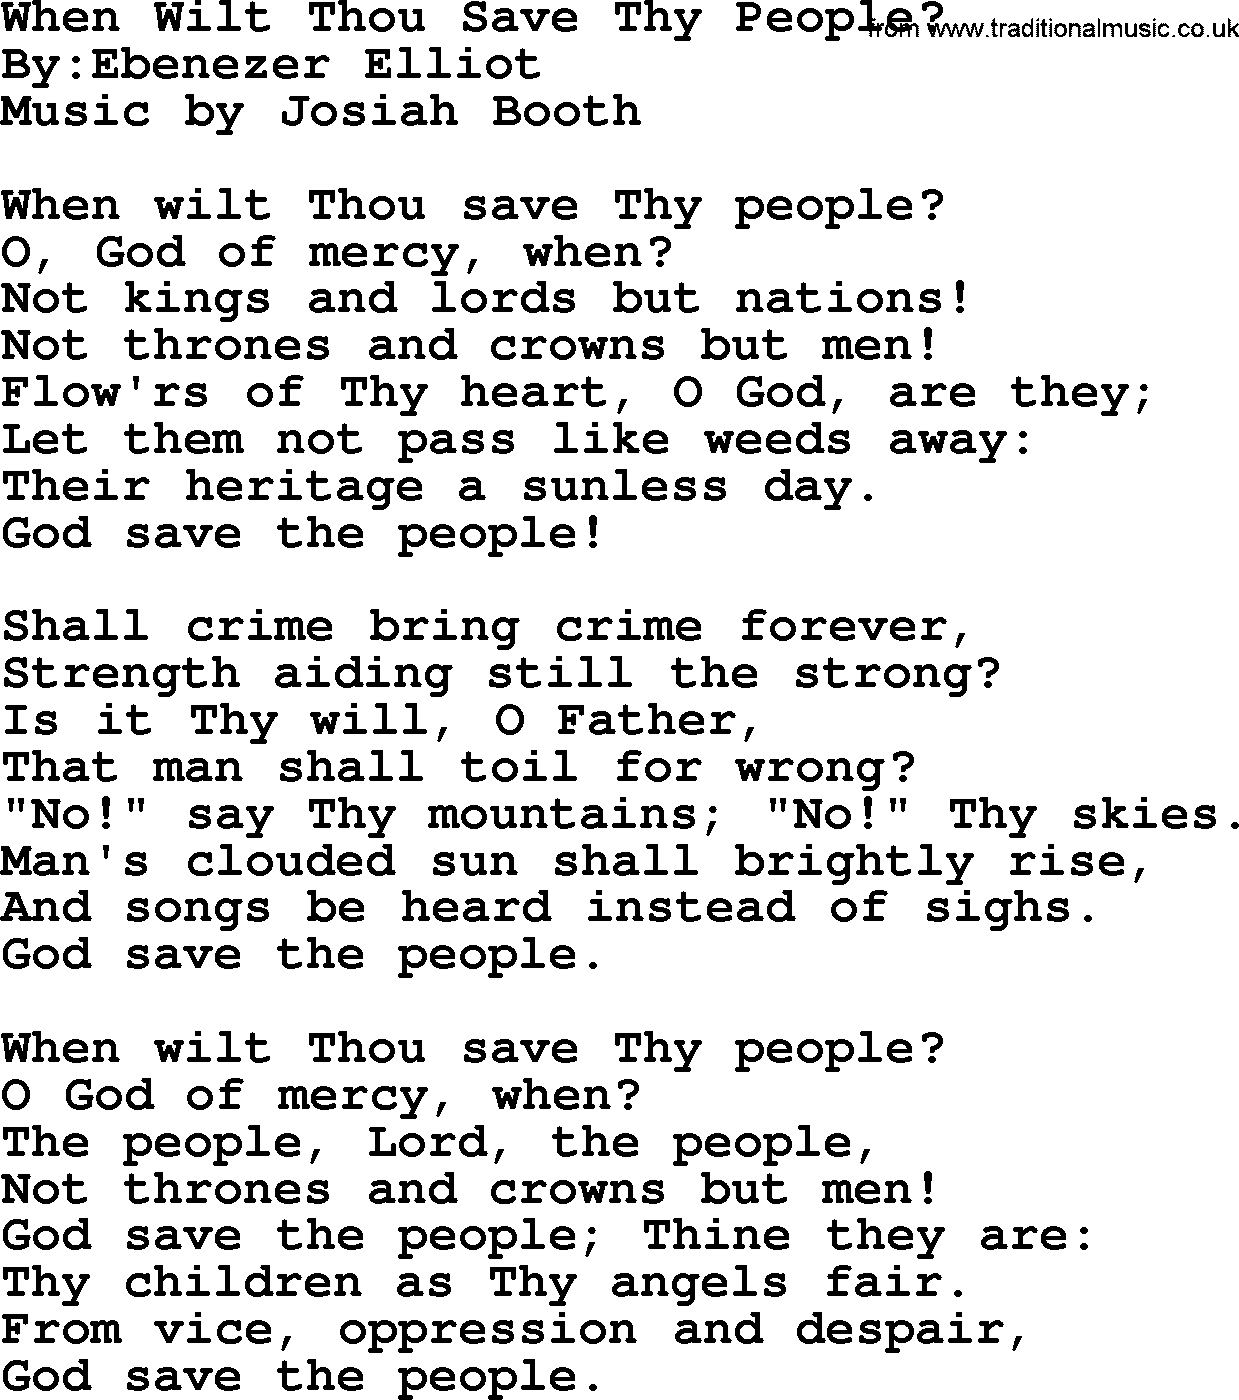 Political, Solidarity, Workers or Union song: When Wilt Thou Save Thy People, lyrics